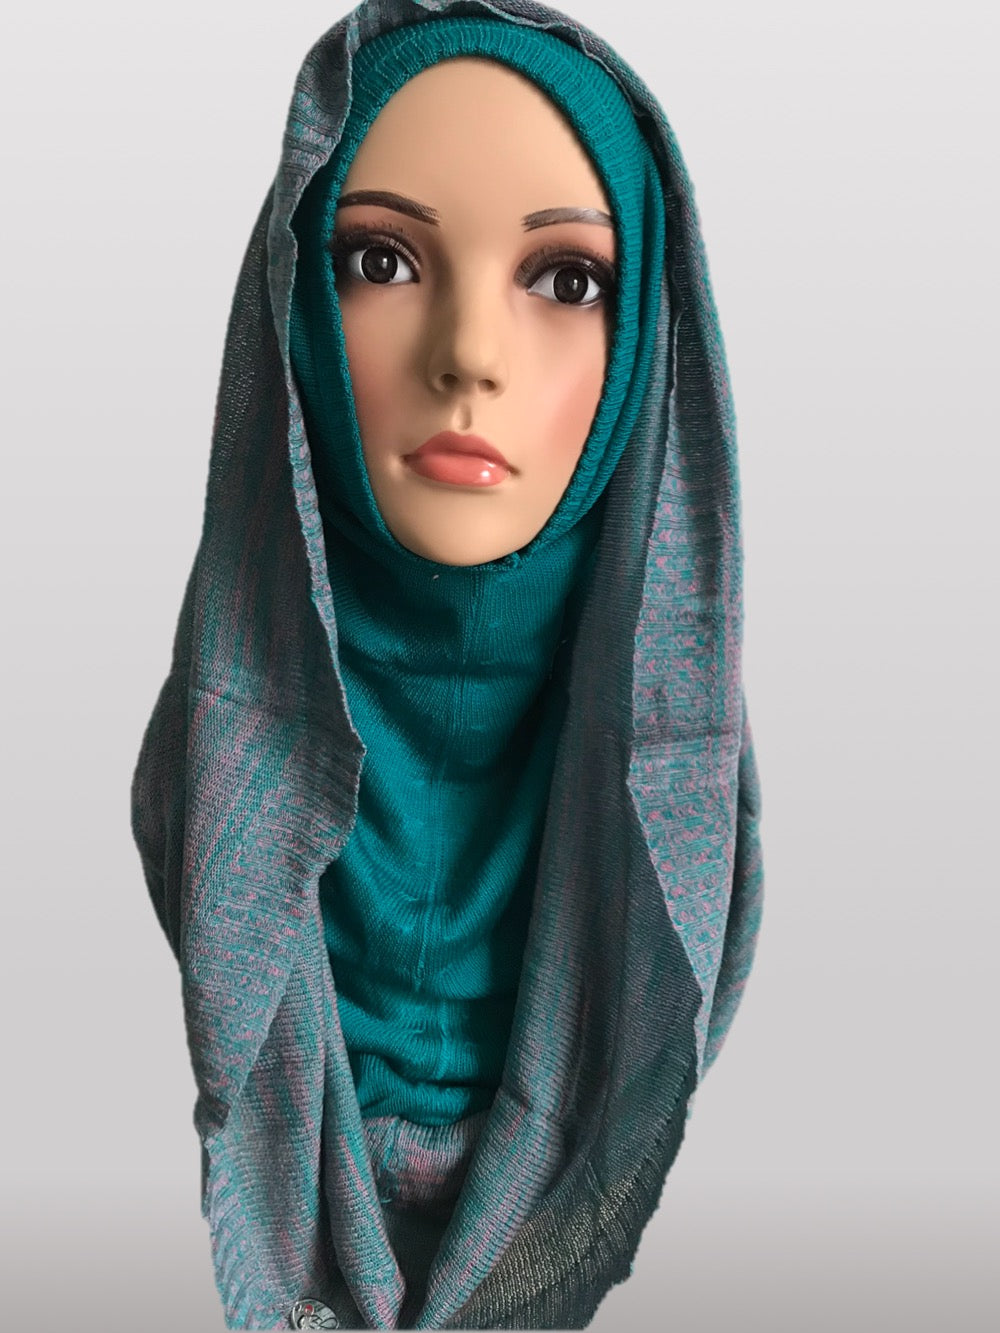 Hooded knitted Instant hijab green grey